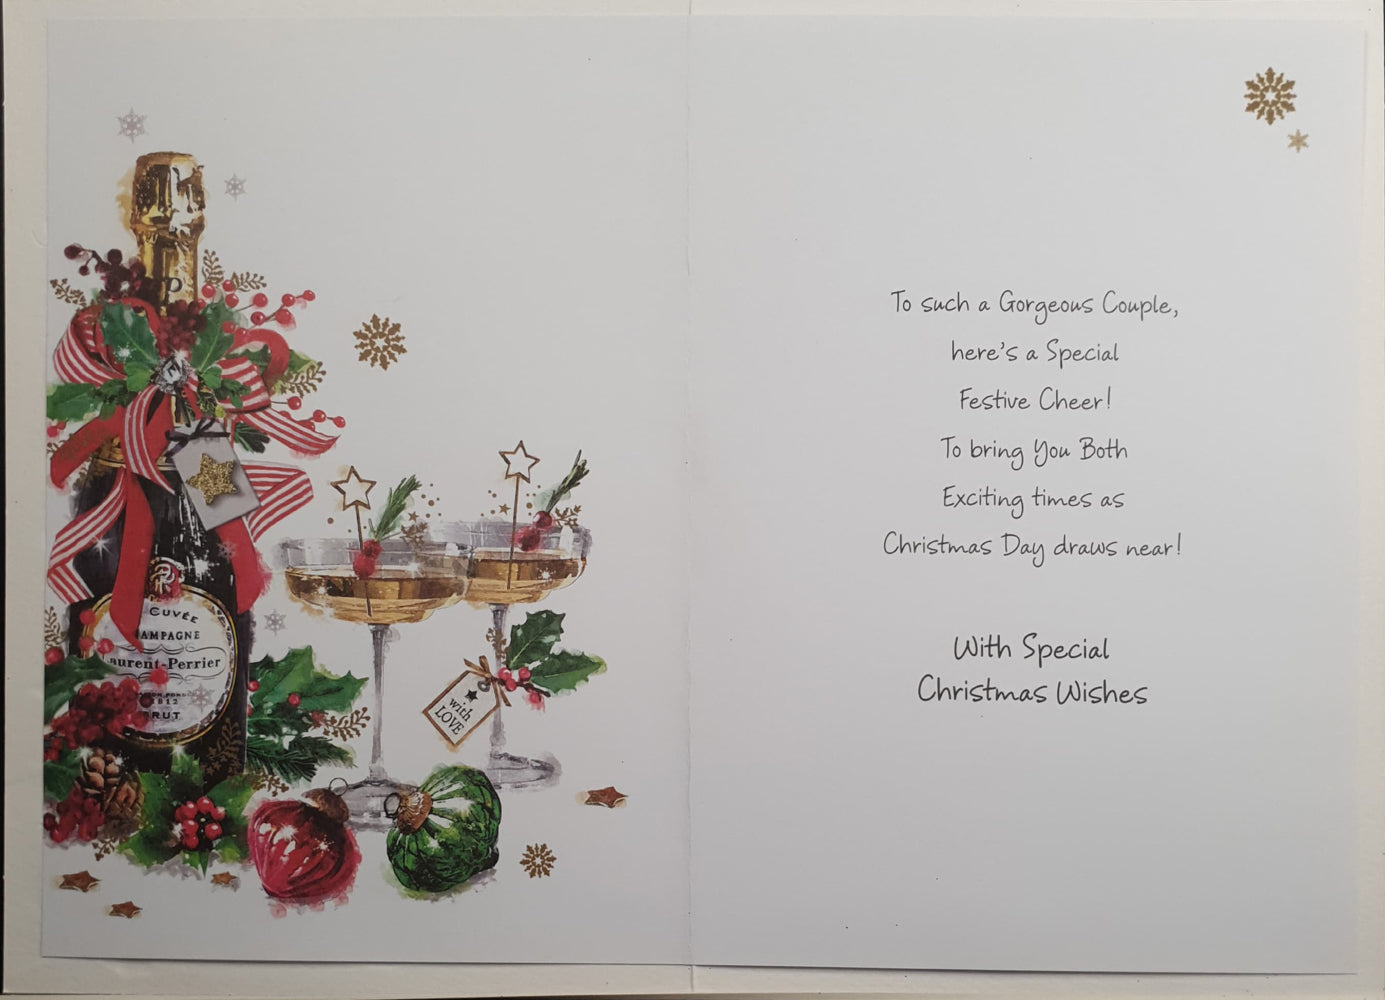 Special Son And Daughter In Law Christmas Card - Champagne Bottle & Snow